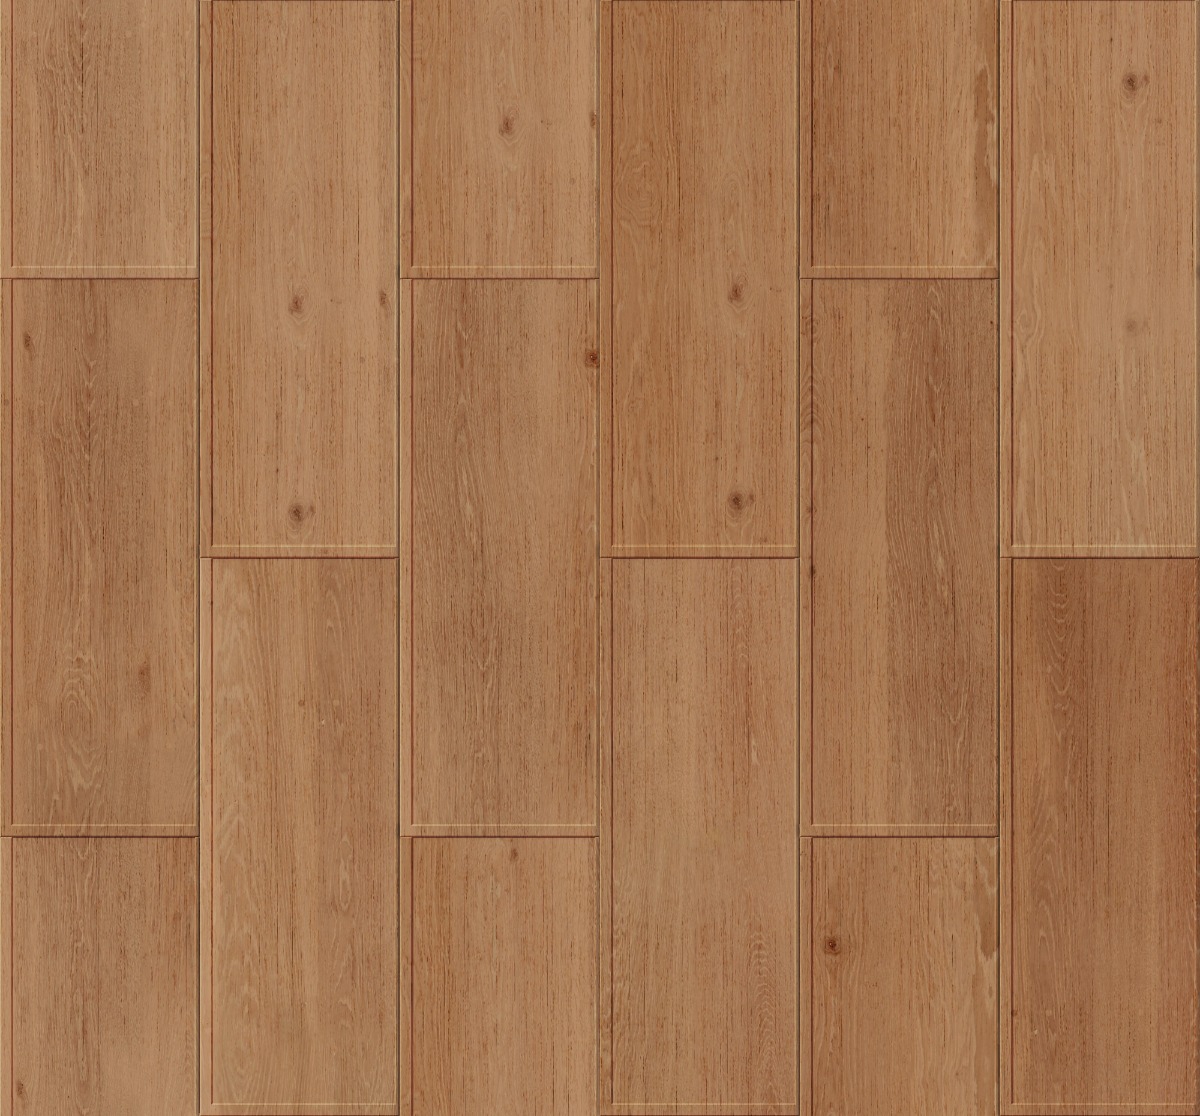 A seamless wood texture with western red cedar boards arranged in a Stretcher pattern